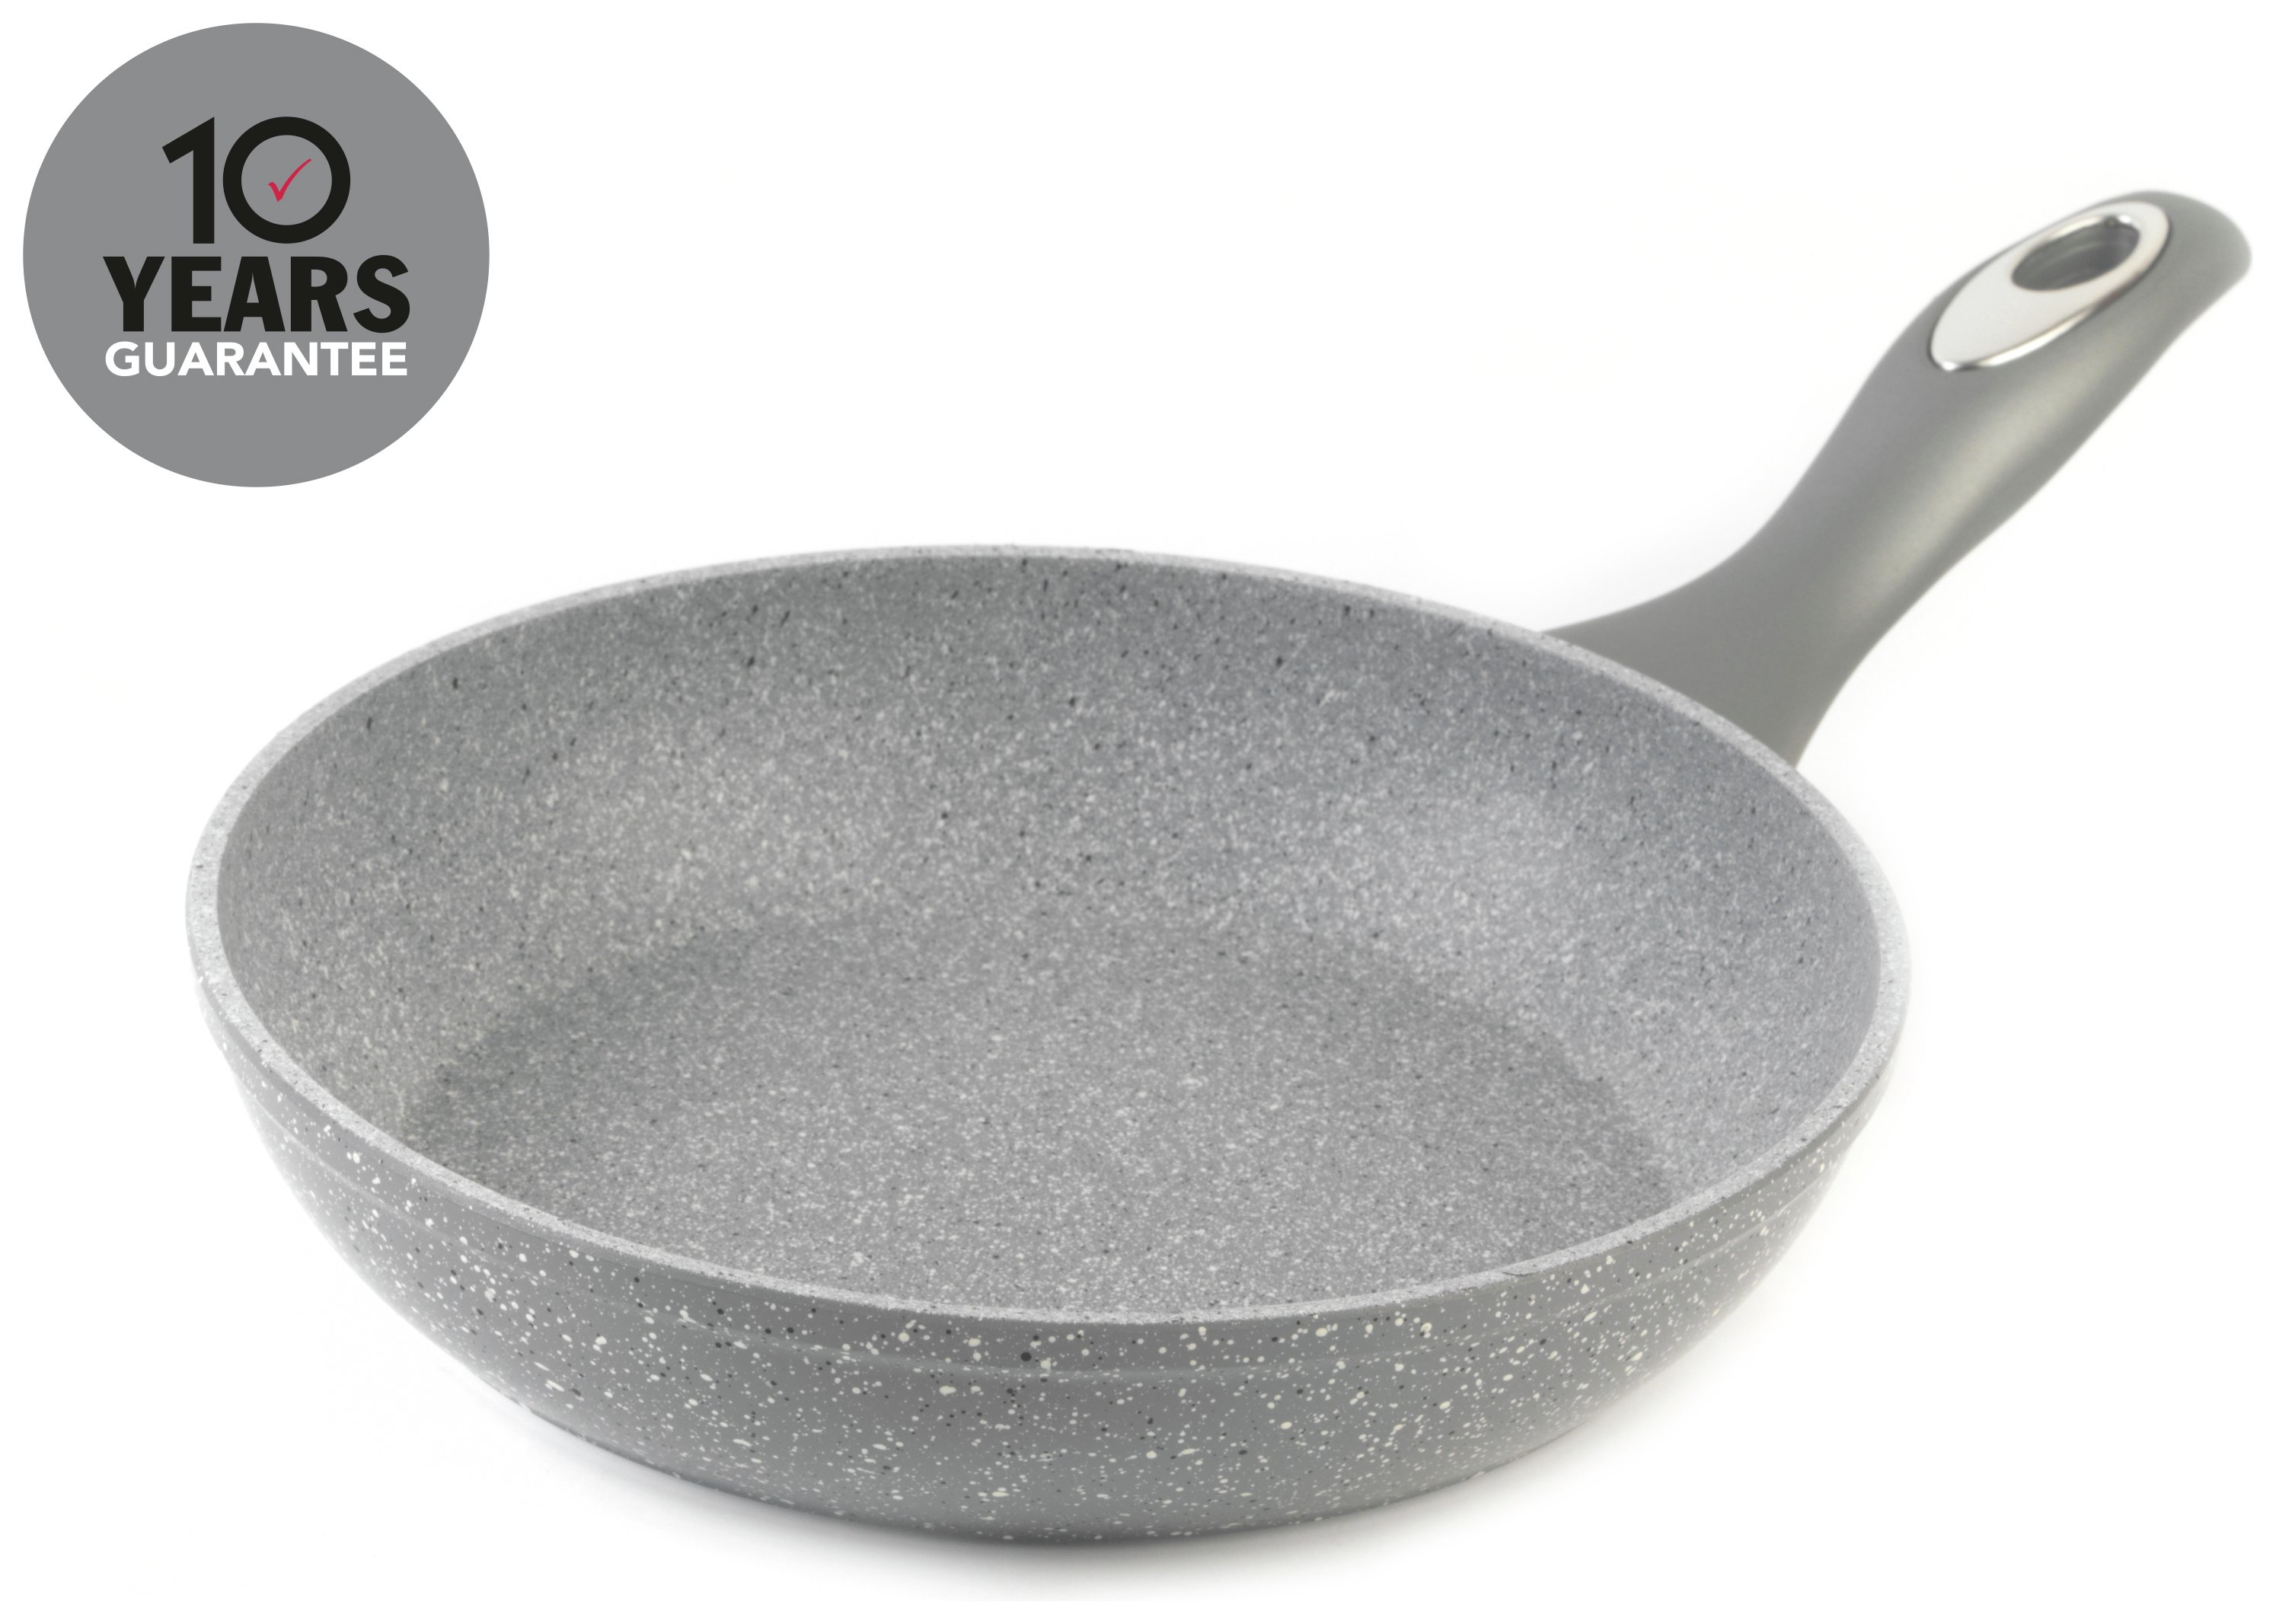 Salter 28cm Forged Marble Non-Stick Aluminium Frying Pan